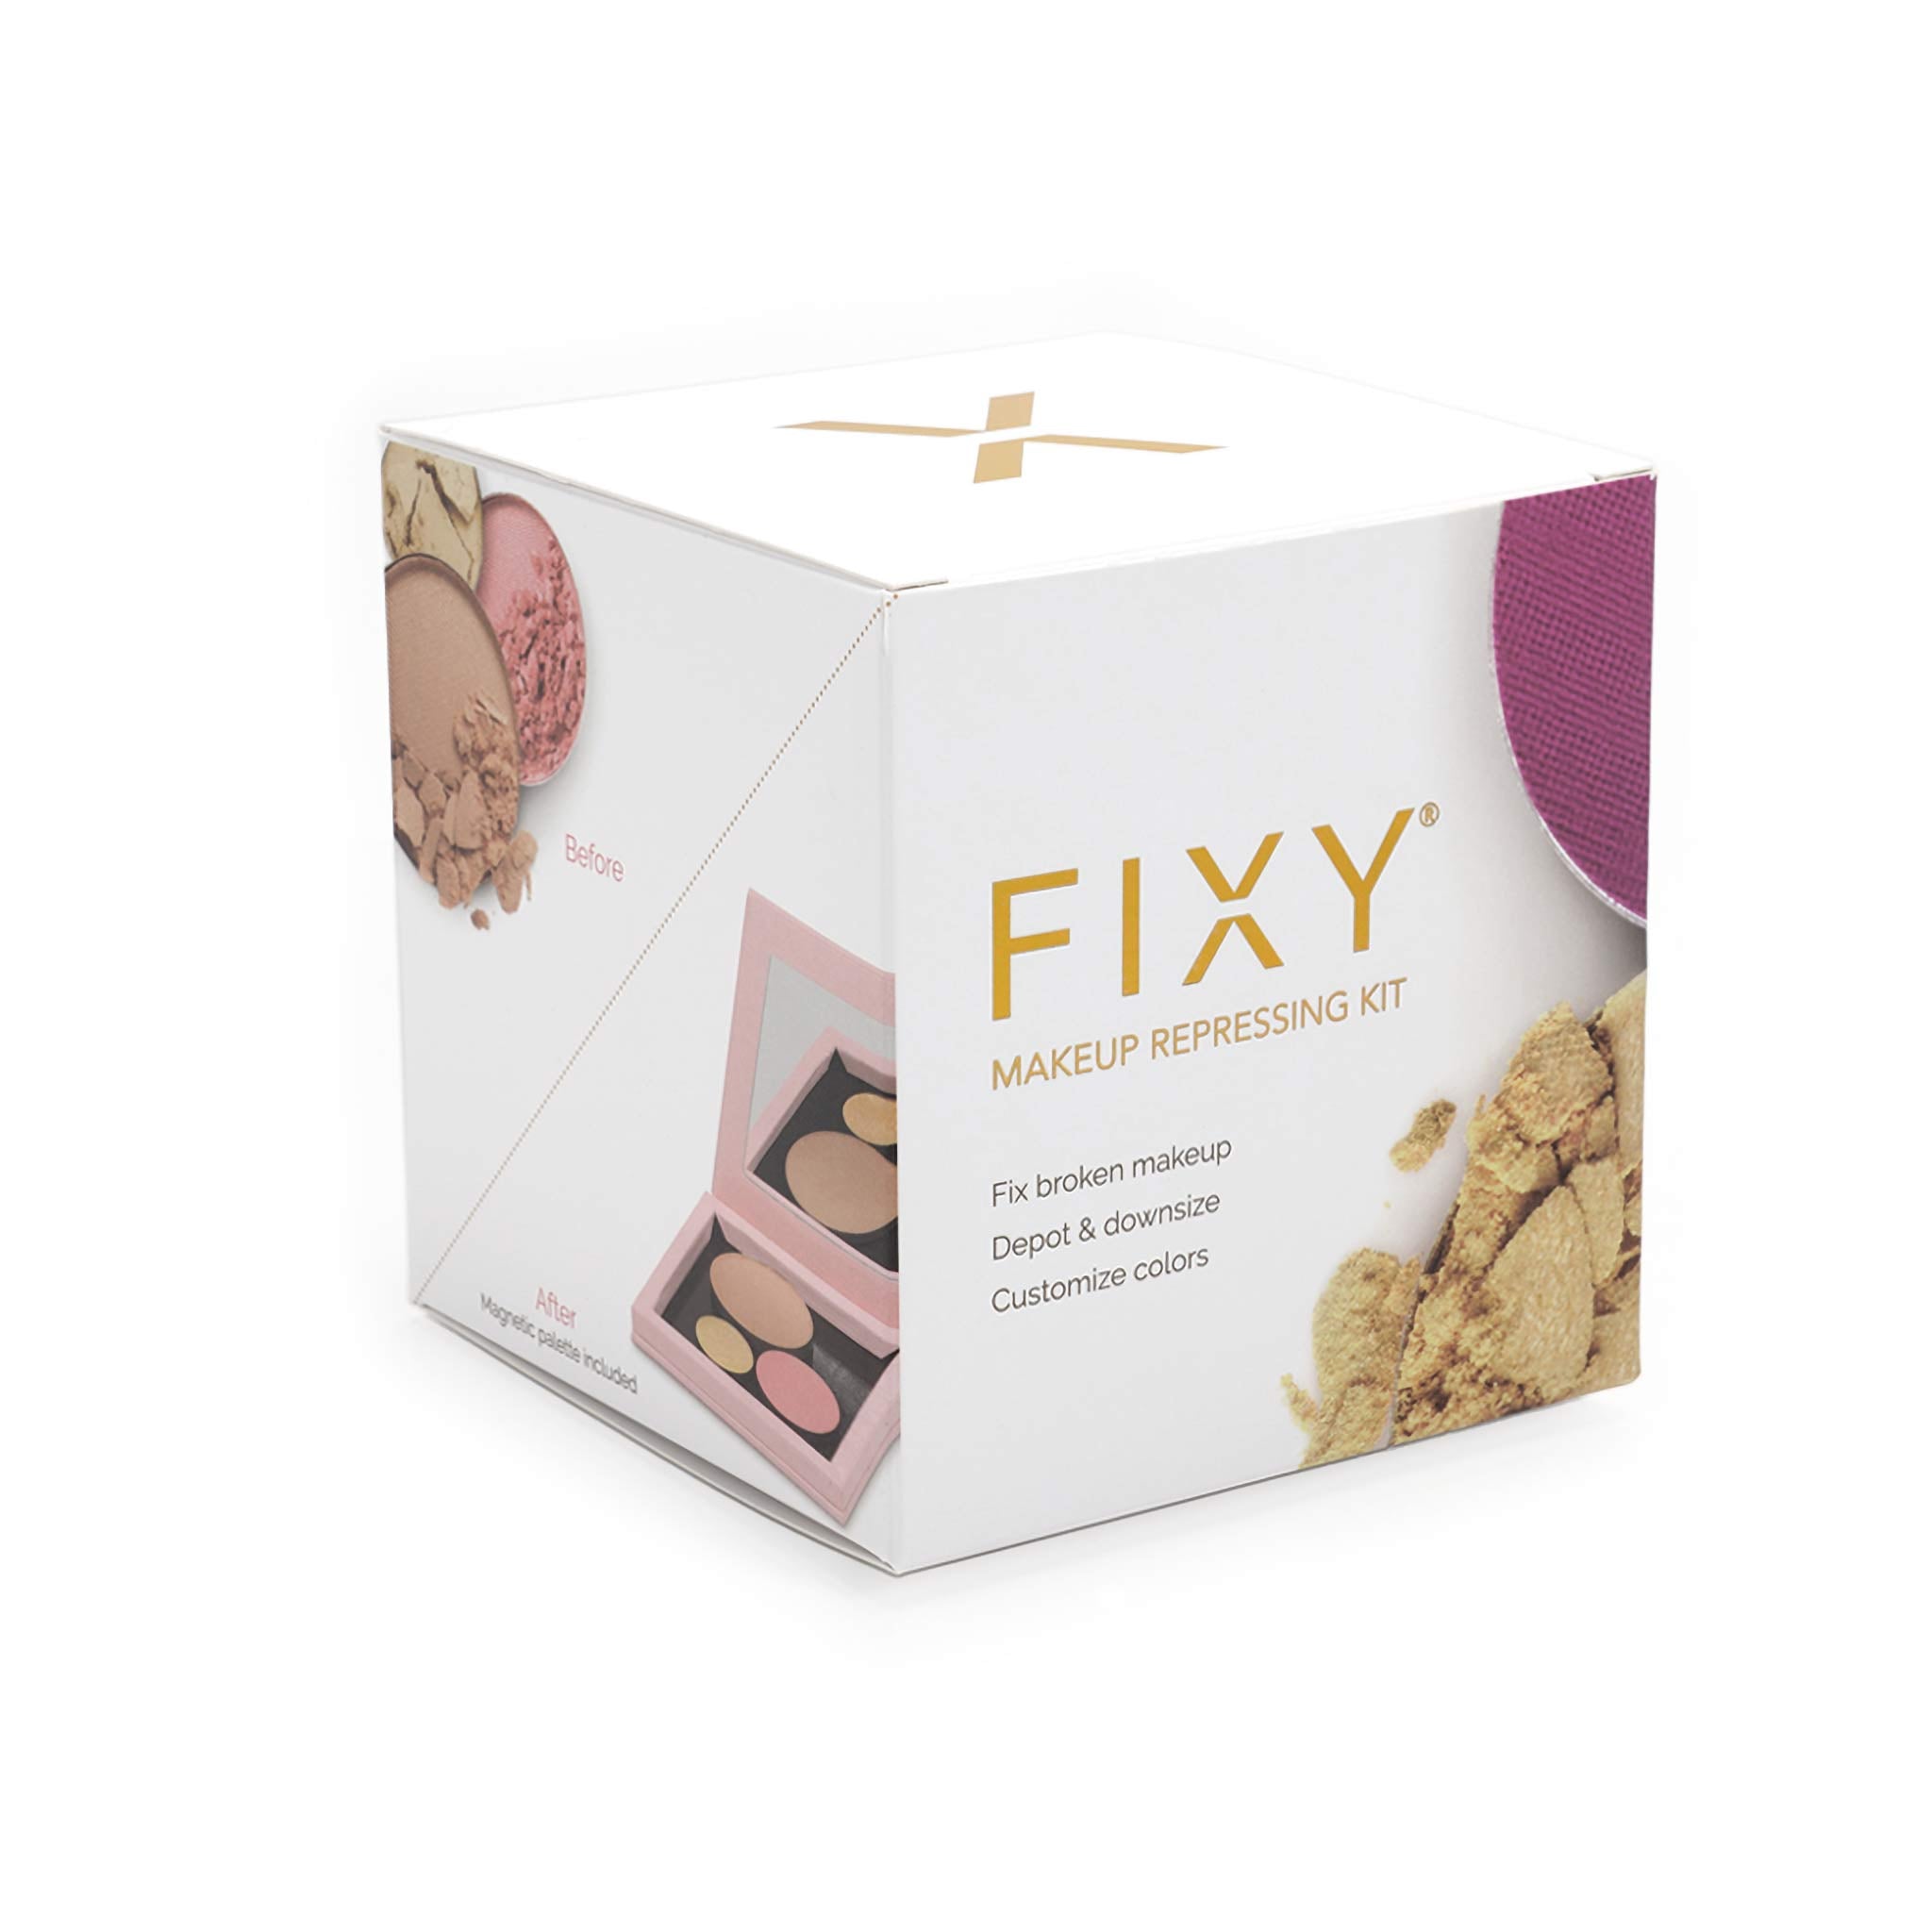 Packaging box of FIXY Makeup Repressing Kit Circle Pans with features listed: 'Fix broken makeup, Depot & downsize, Customize colors'. Visible on the box is a preview window showing the kit inside with crushed makeup powders, indicating the repair process.